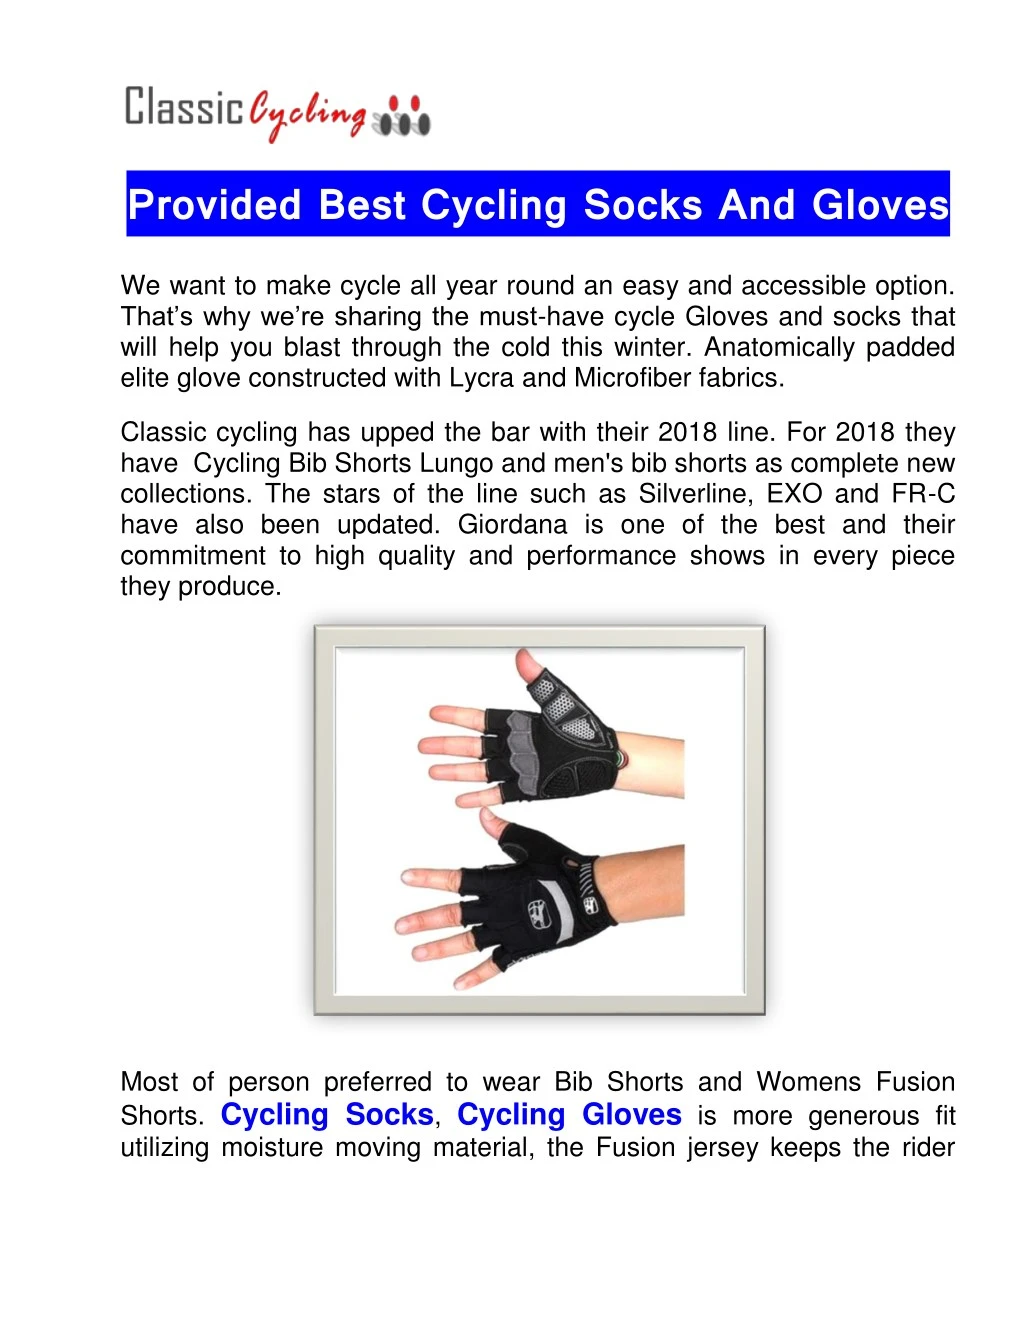 provided best cycling socks and gloves